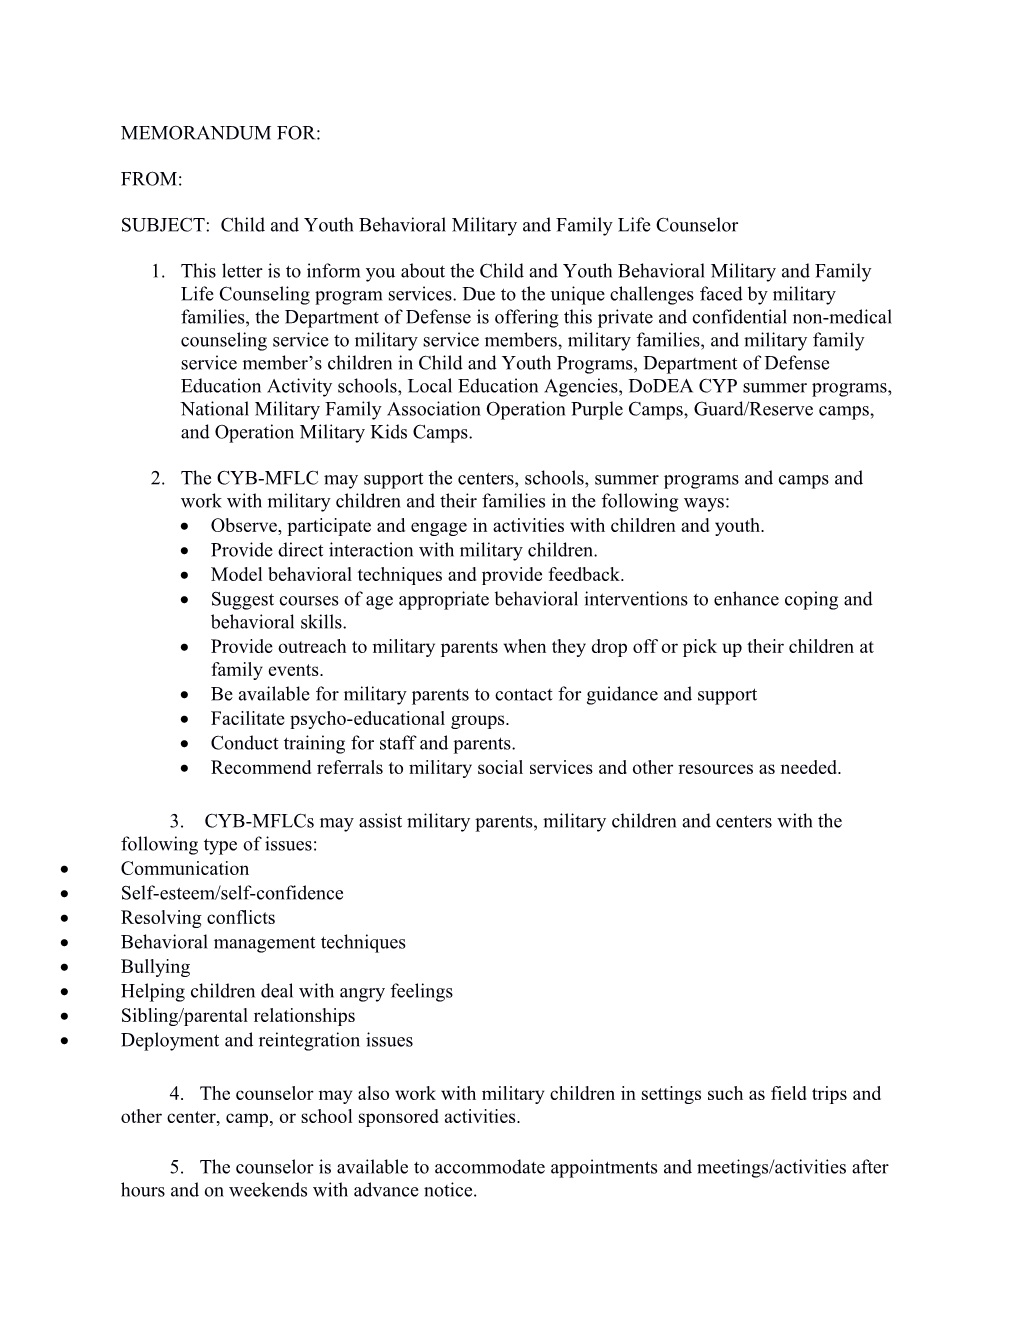 SUBJECT: Child and Youth Behavioral Military and Family Life Counselor